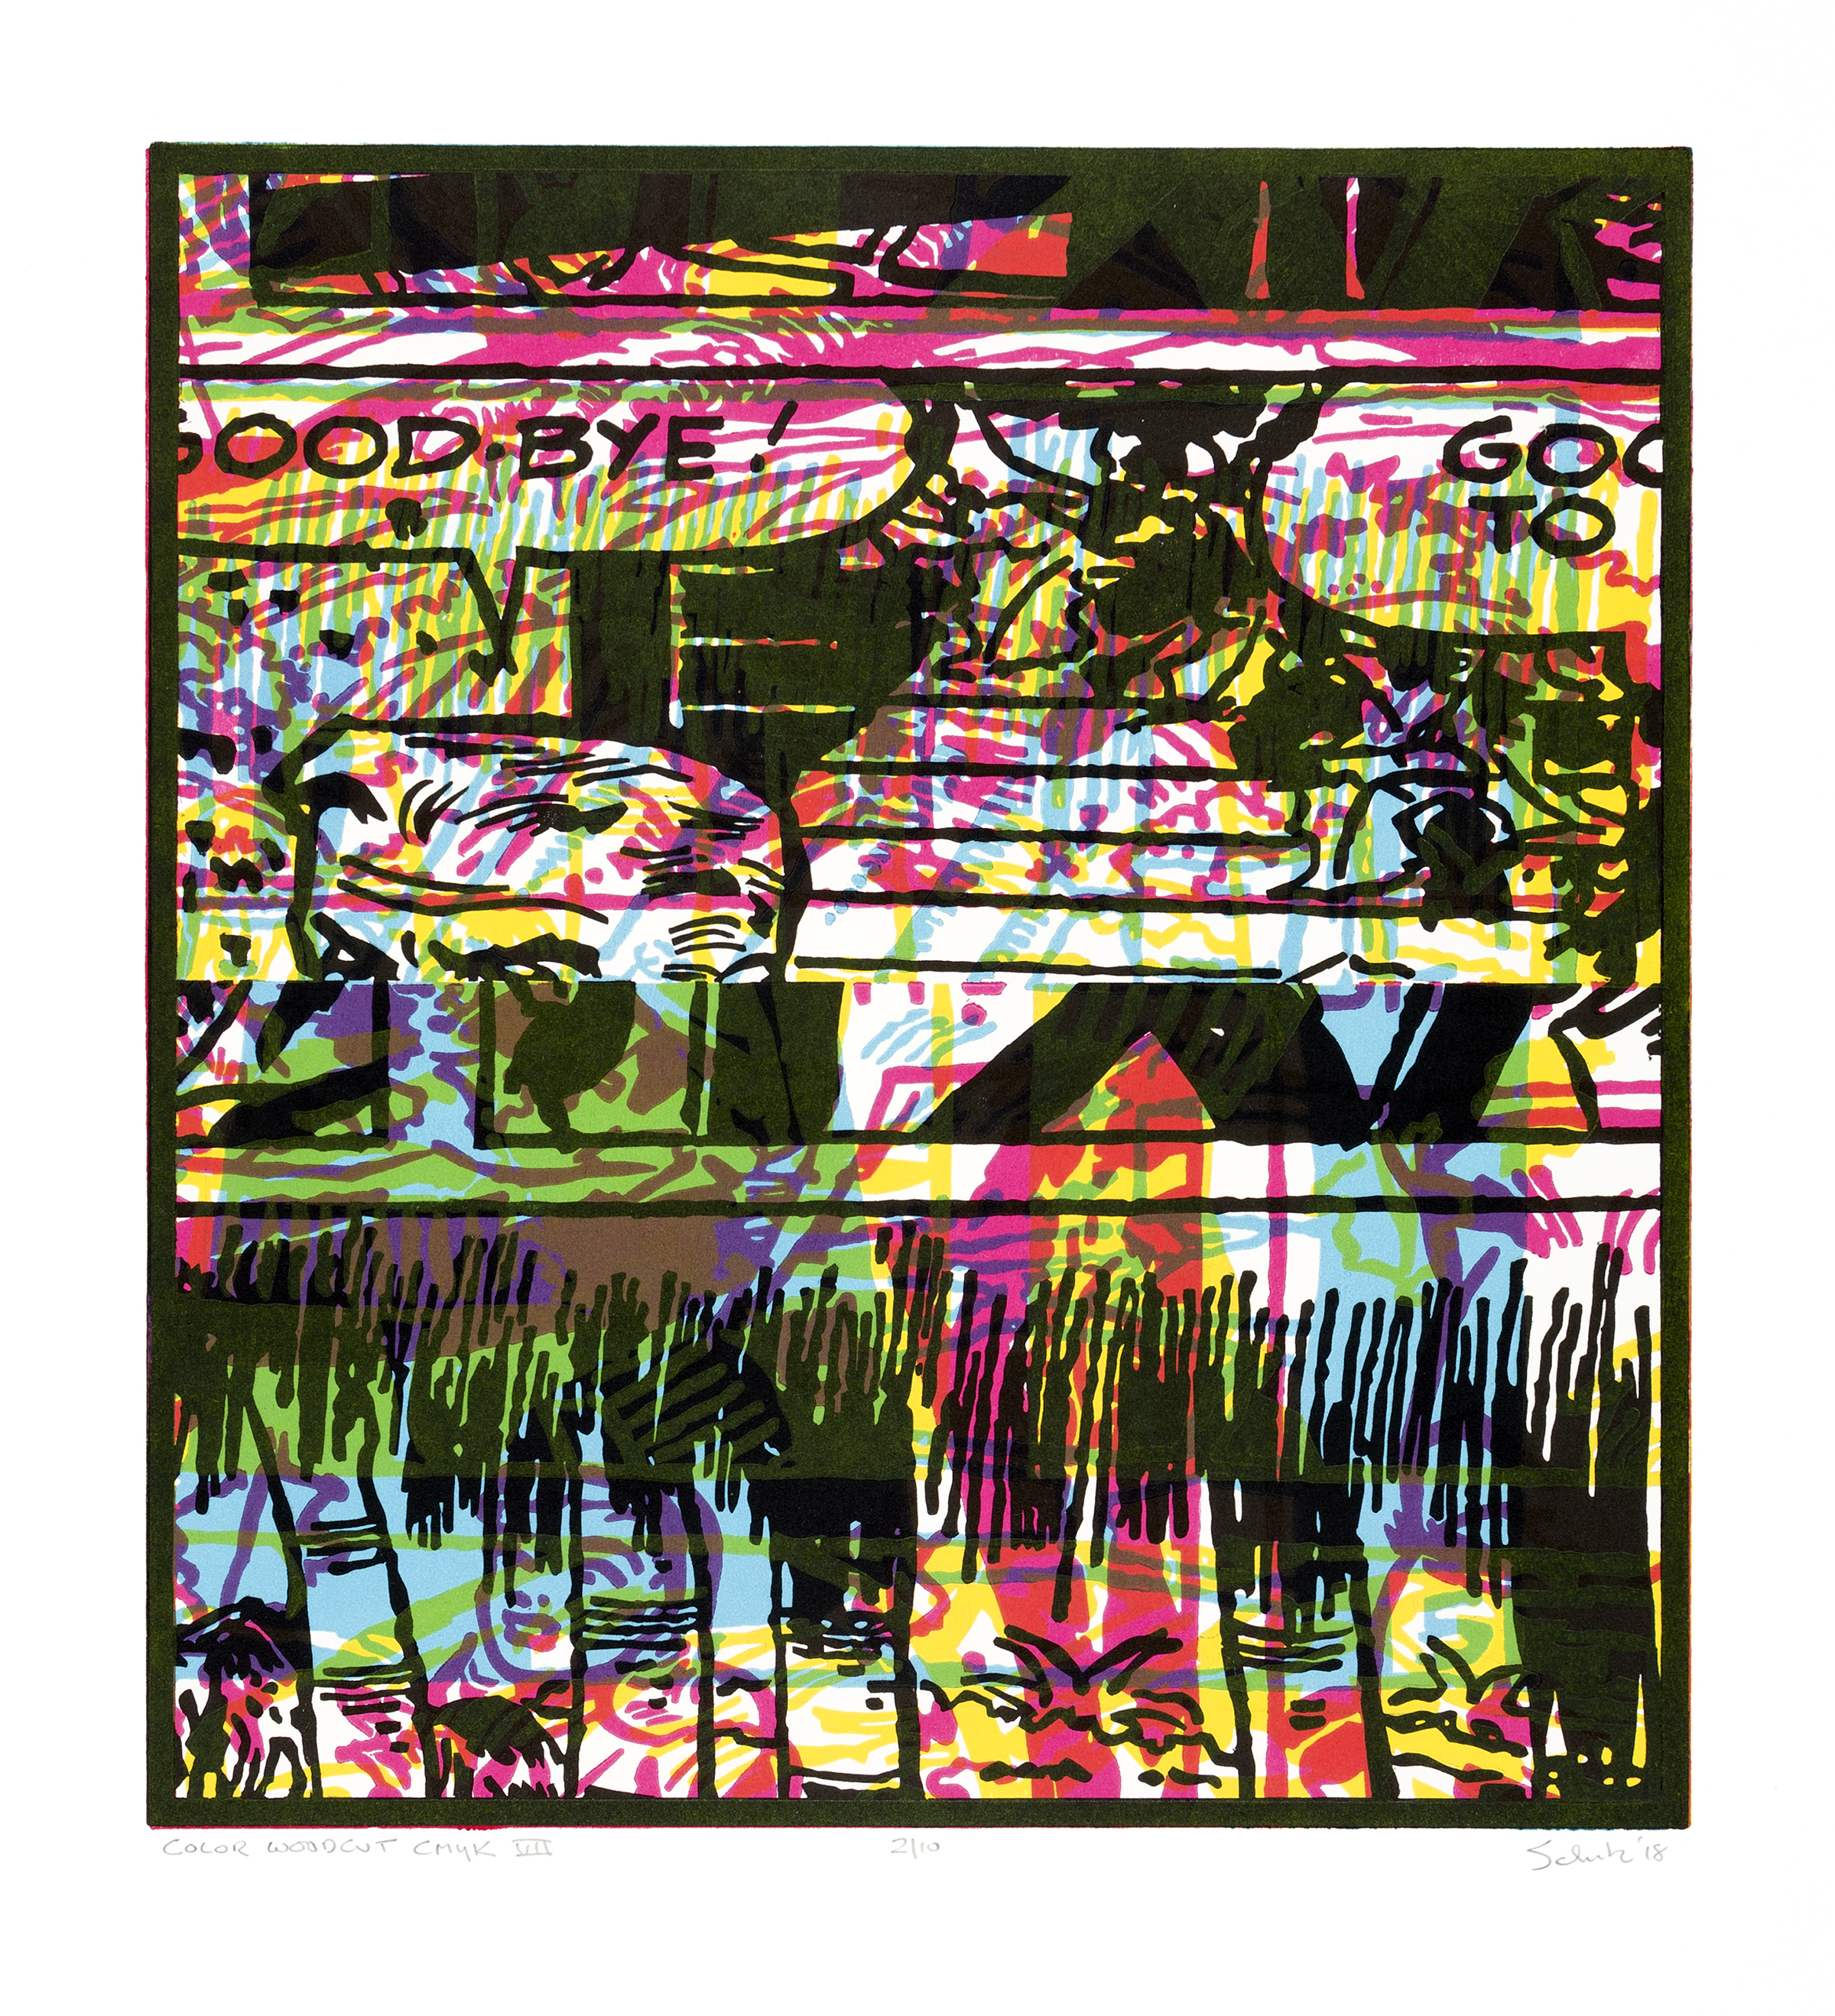 Woodblock print with wide black outlines done in choppy horizontal segments on top of bright pink, green, yellow, and blue colors. All prints are segments of comic strips. Two word bubbles are visible stating 'Good-Bye!' and 'Good to Go!'.